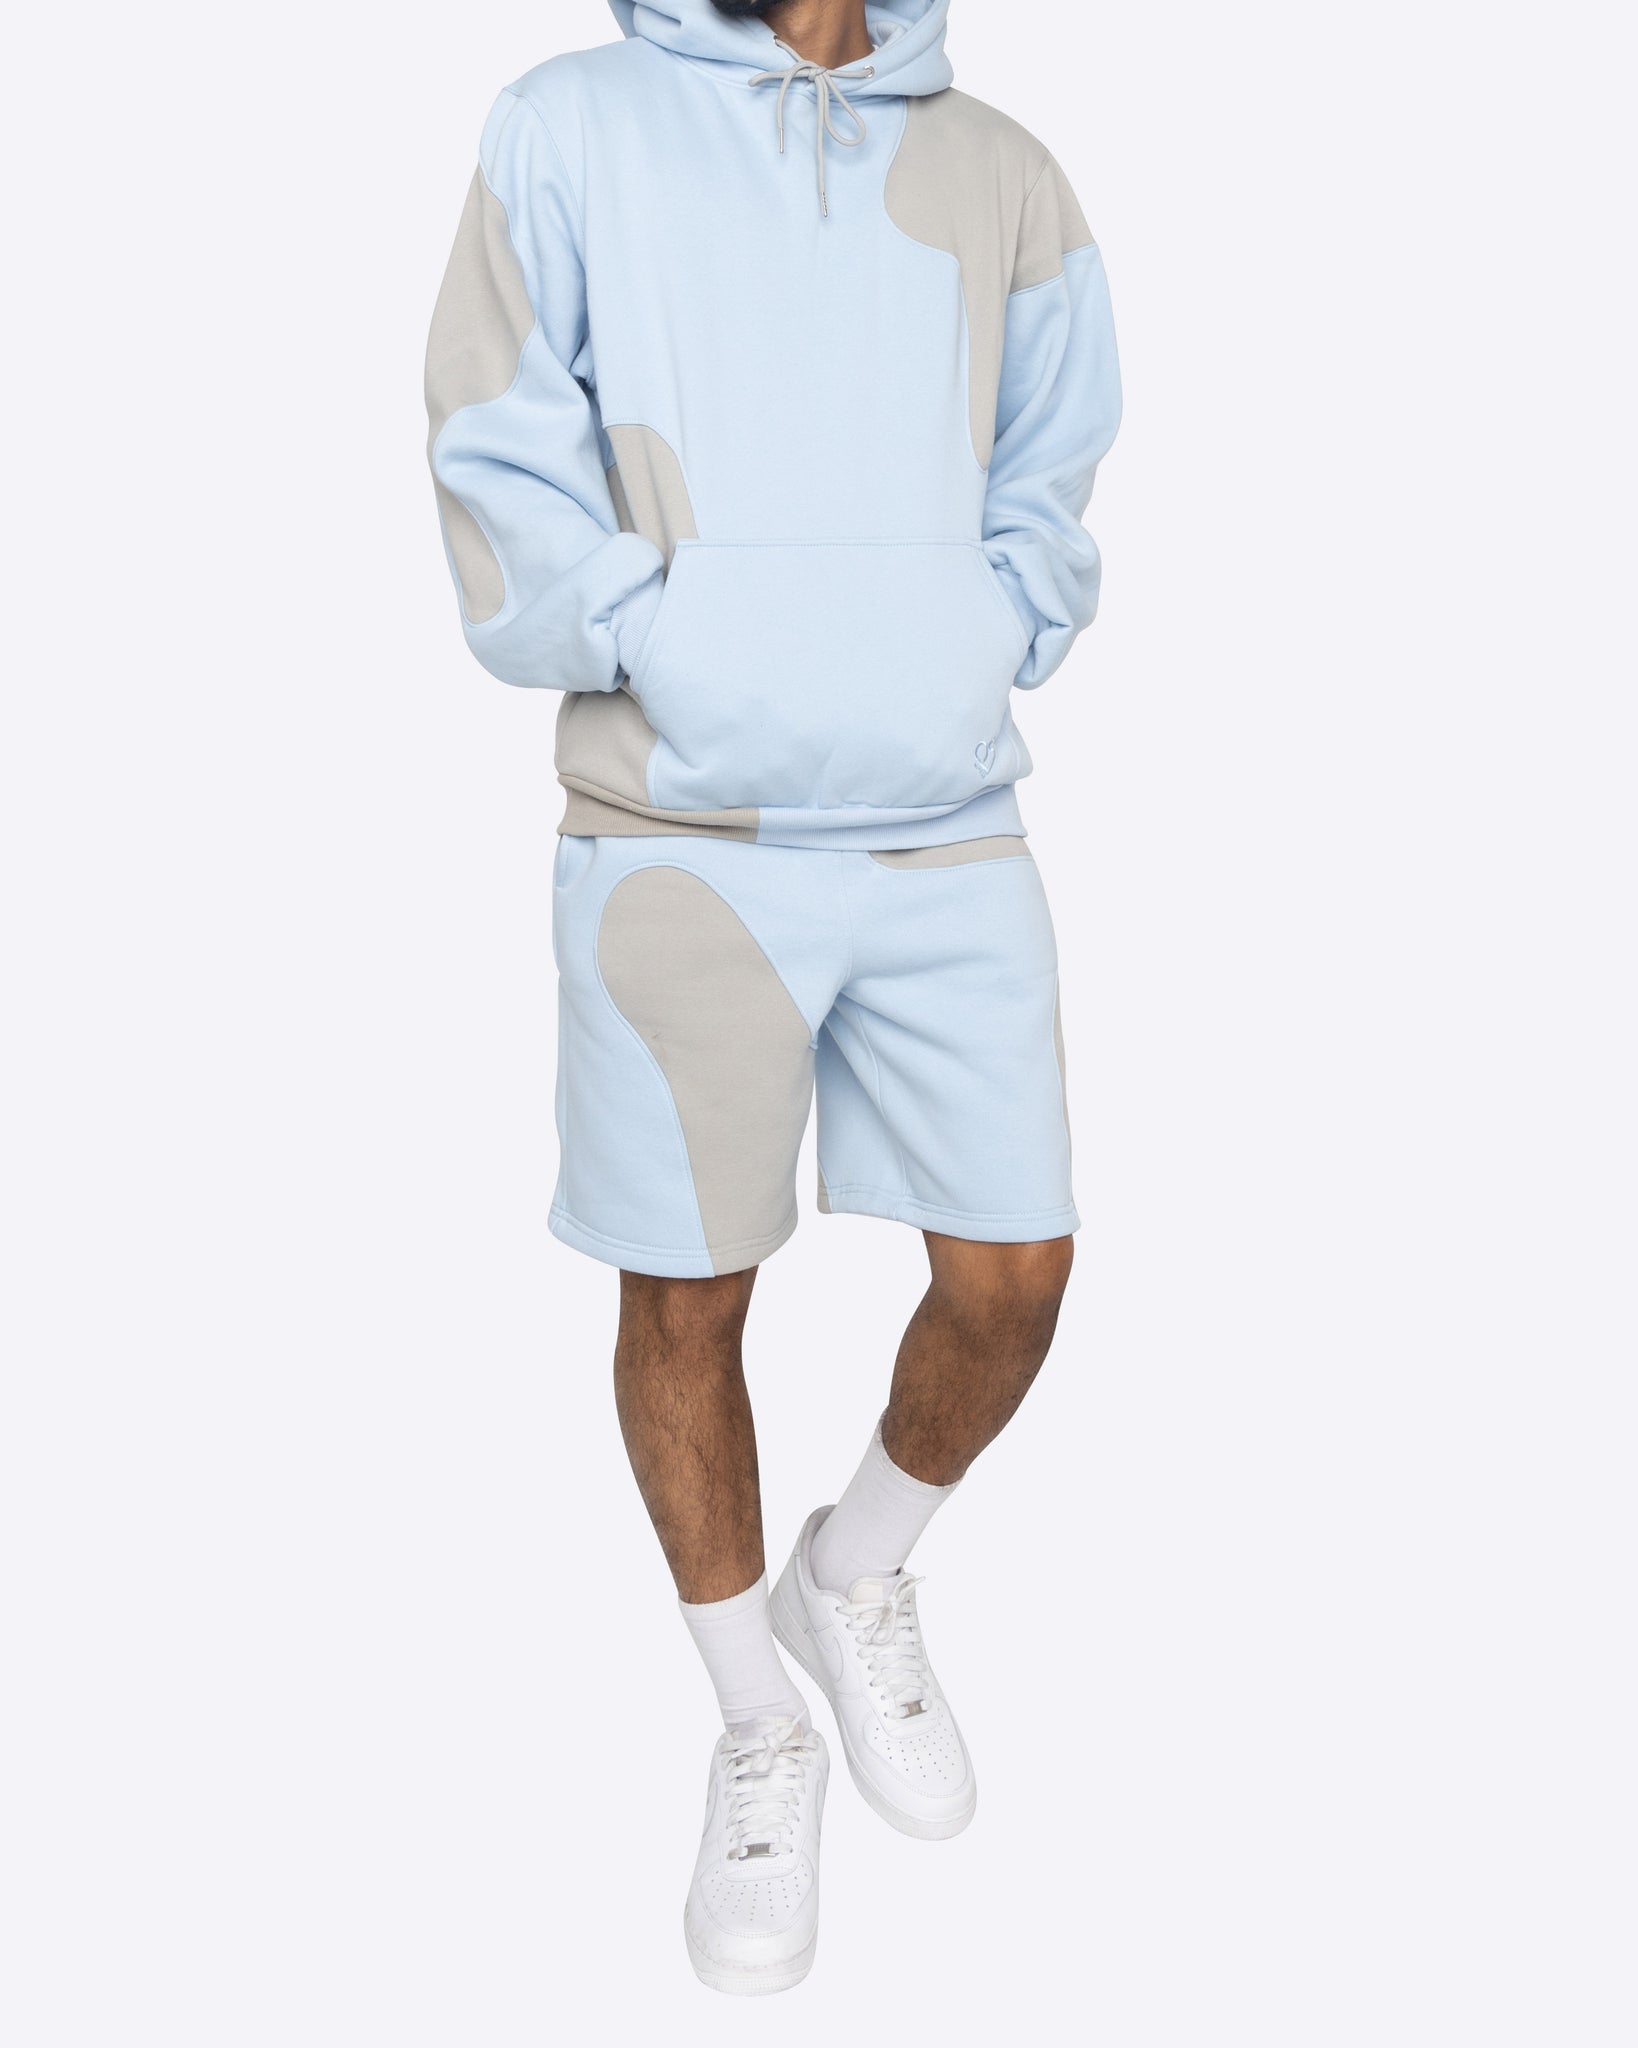 EPTM X PASCAL MARBLE HOODIE-LIGHT BLUE